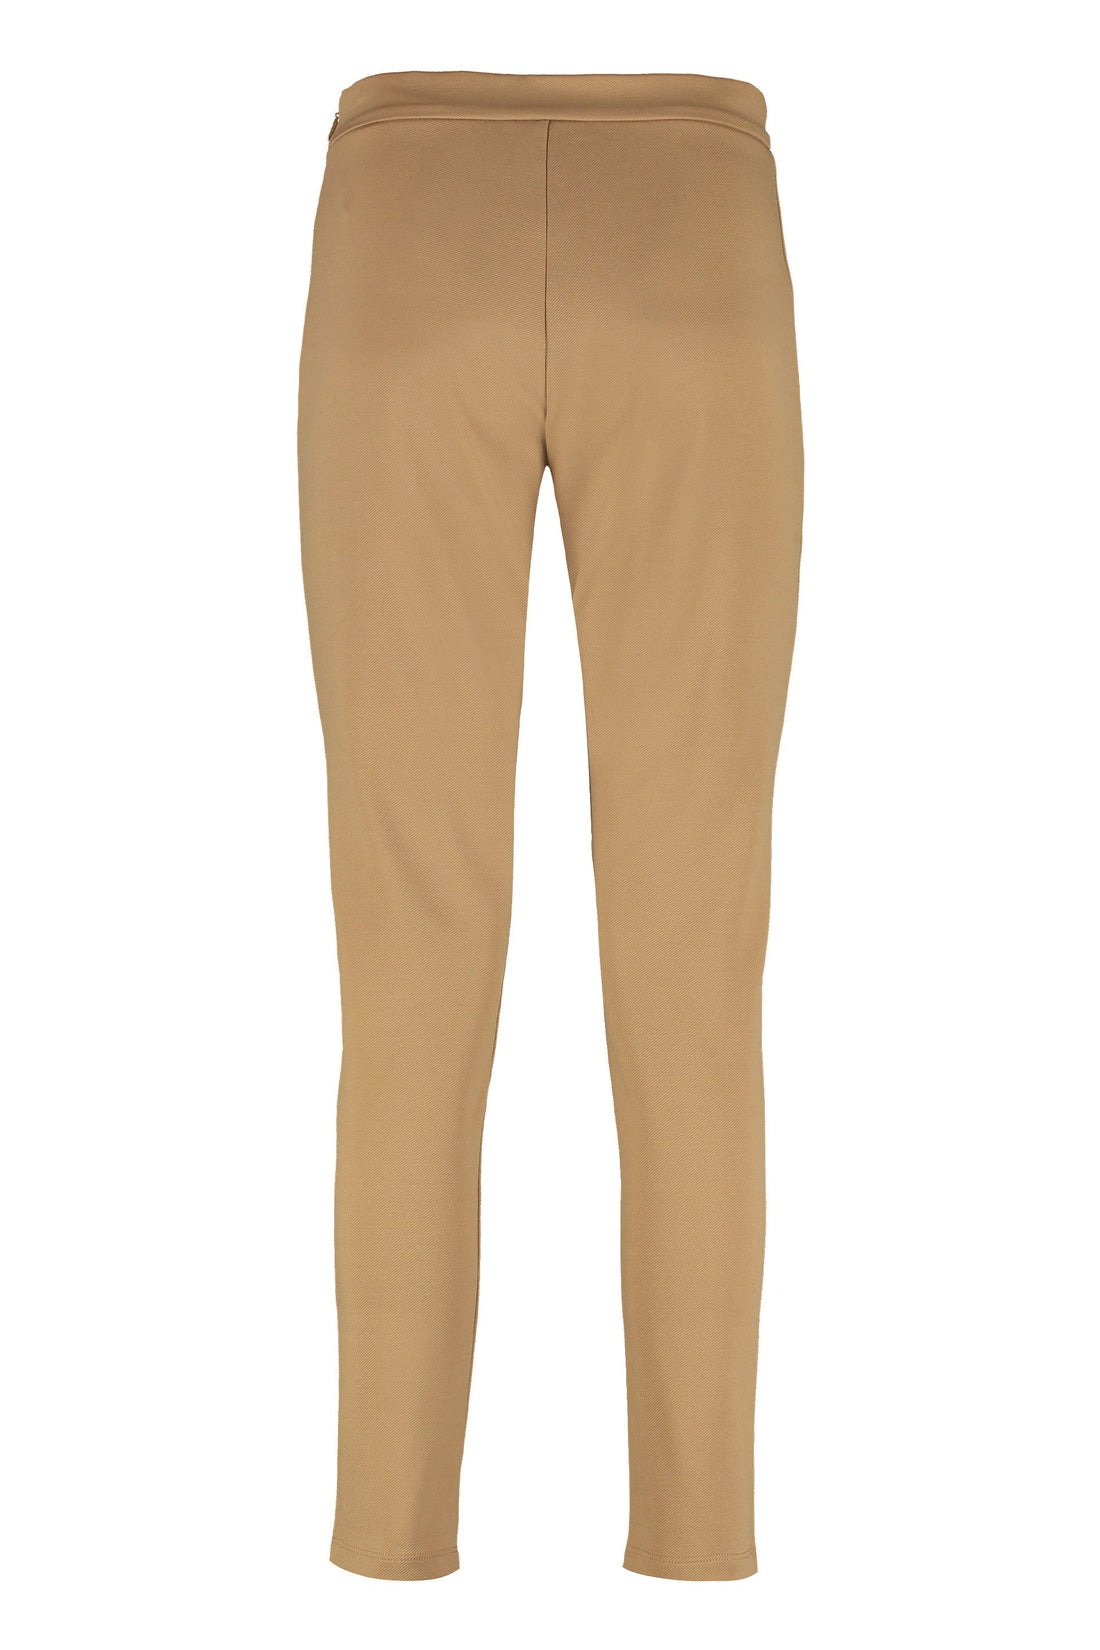 Max Mara-OUTLET-SALE-Rosano skinny trousers-ARCHIVIST